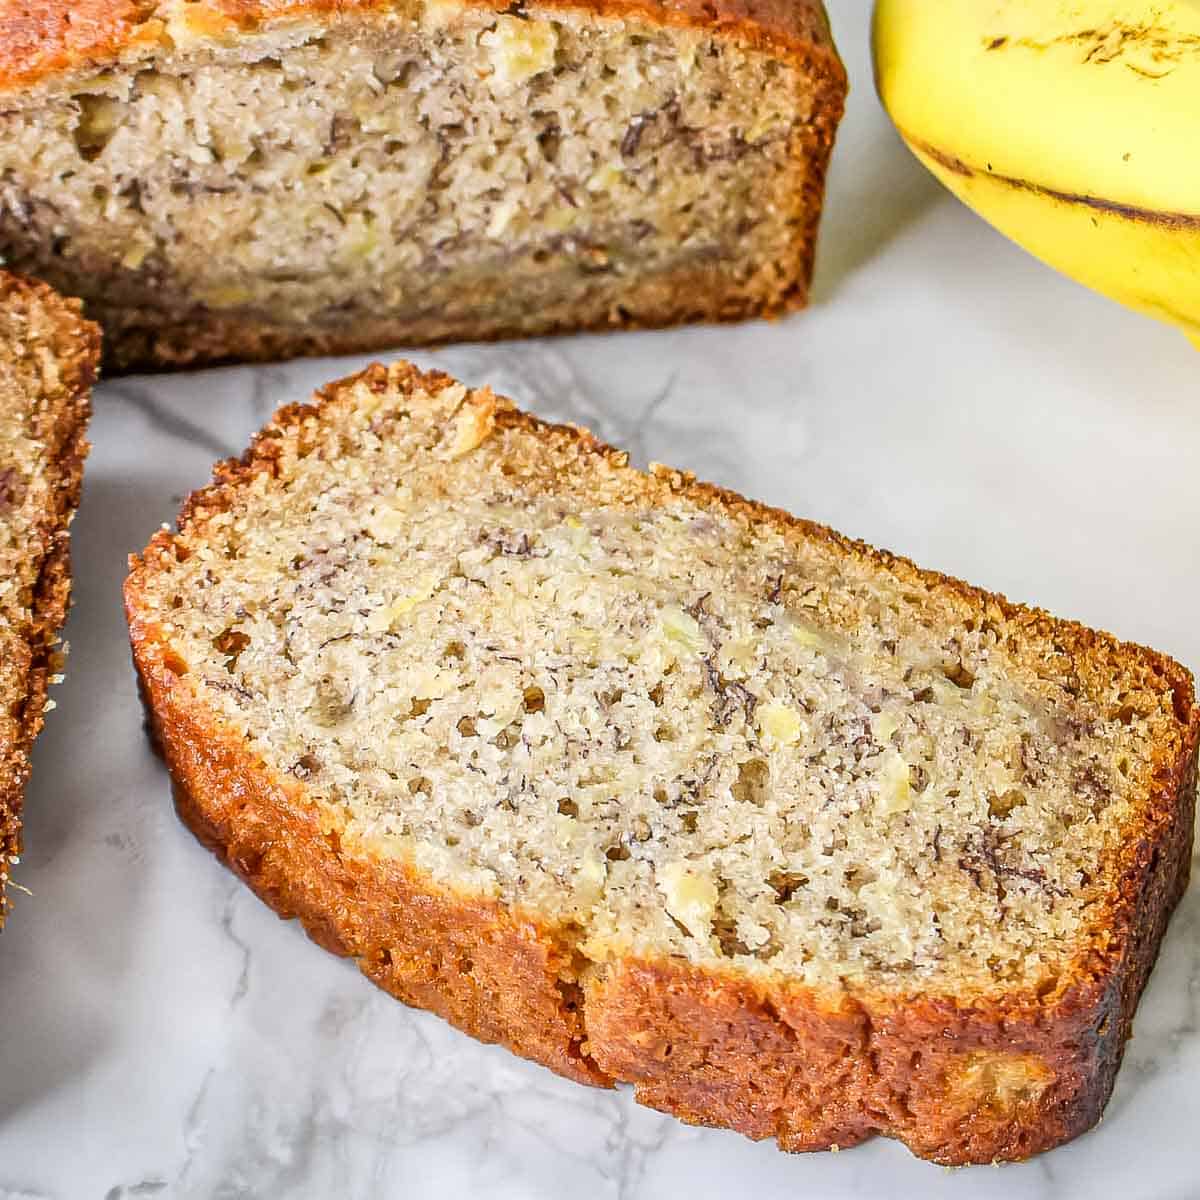 Side close up shot of pineapple banana bread on a marble surface with a banana on the side.